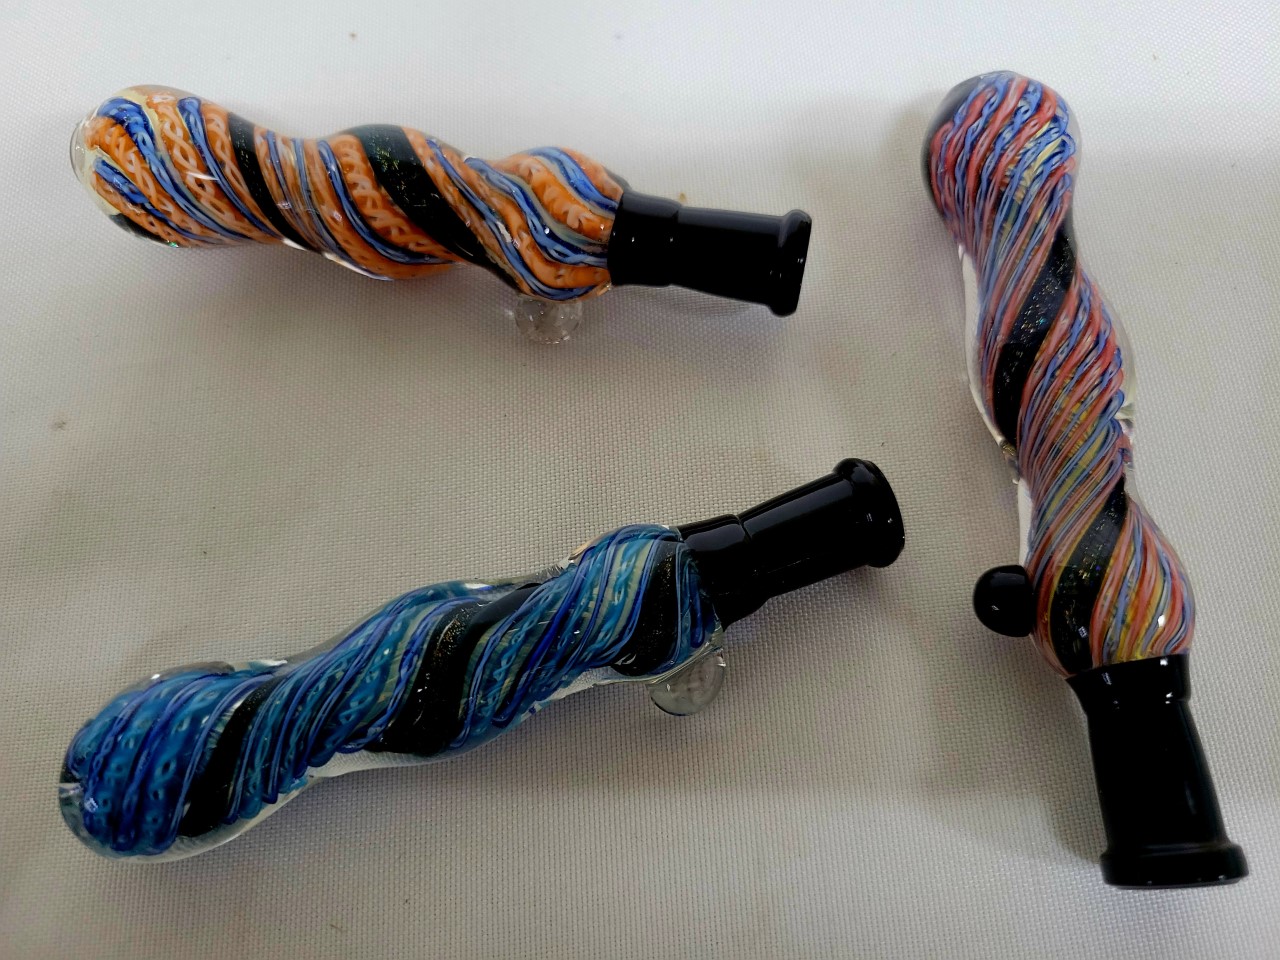 *4.5" Inside Glass Colorful Dicro Chillums-One Hitter #4CH4